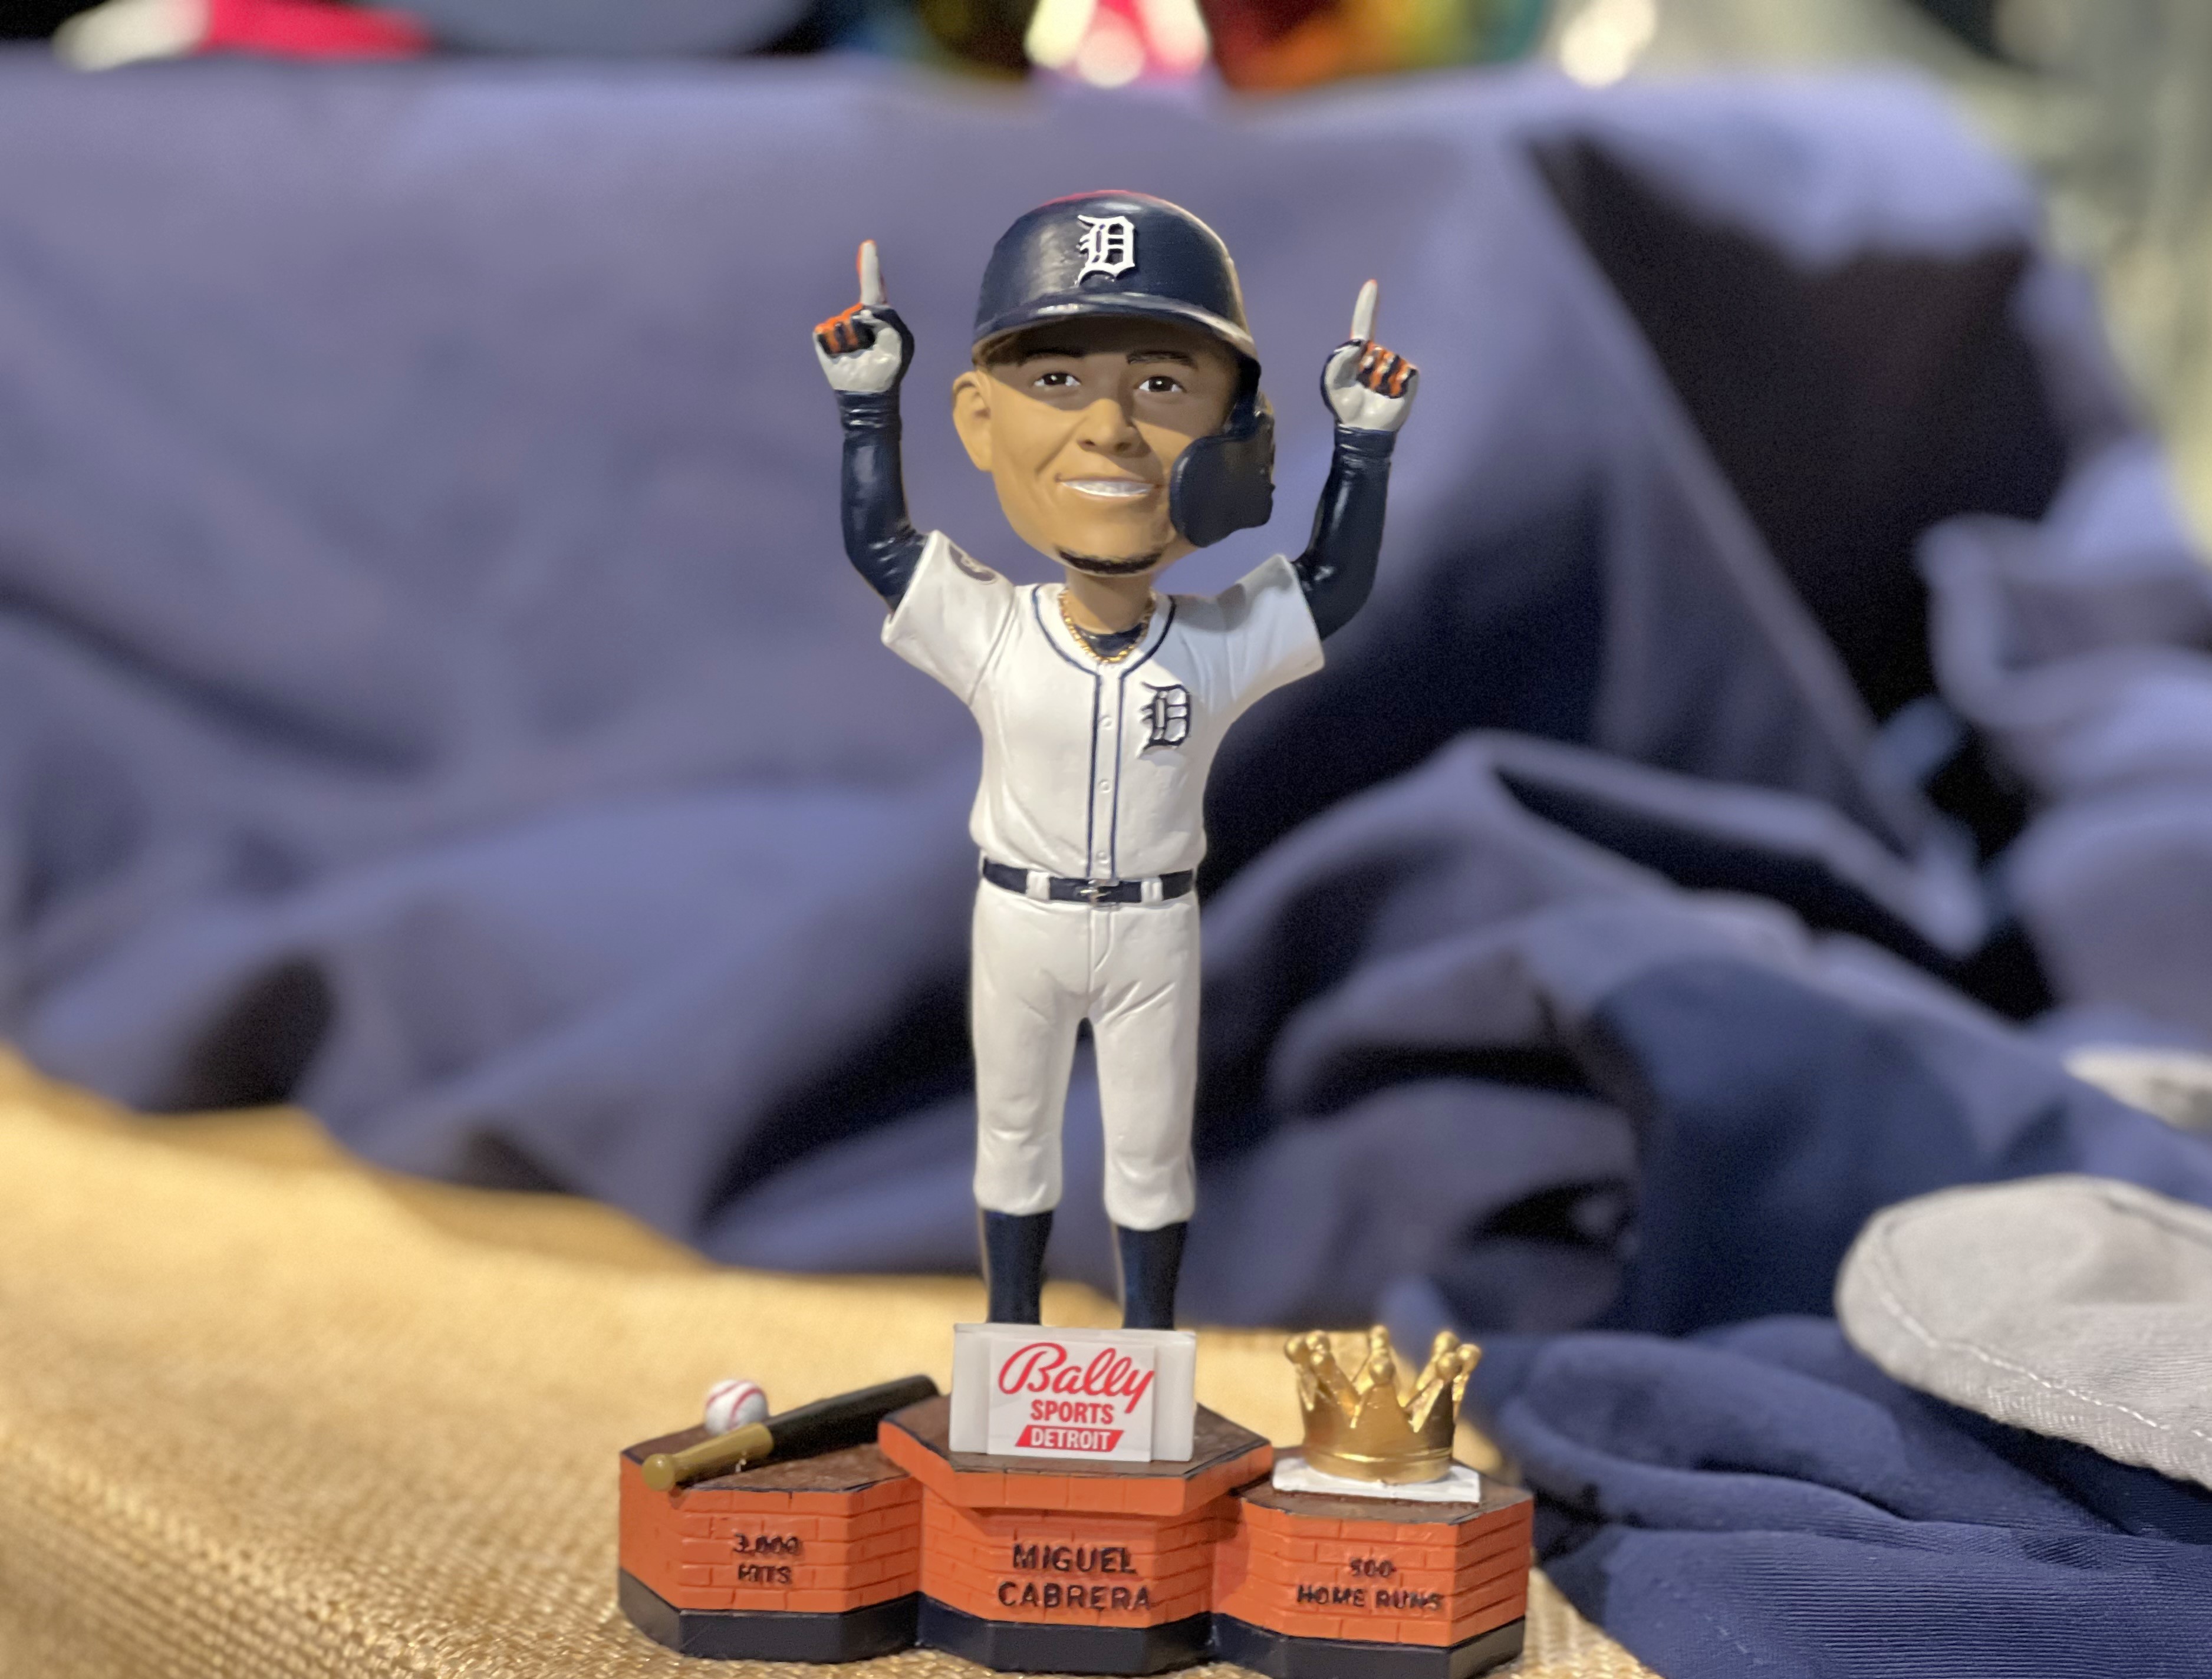 All the Detroit Tigers freebies you can get at Comerica Park this season 